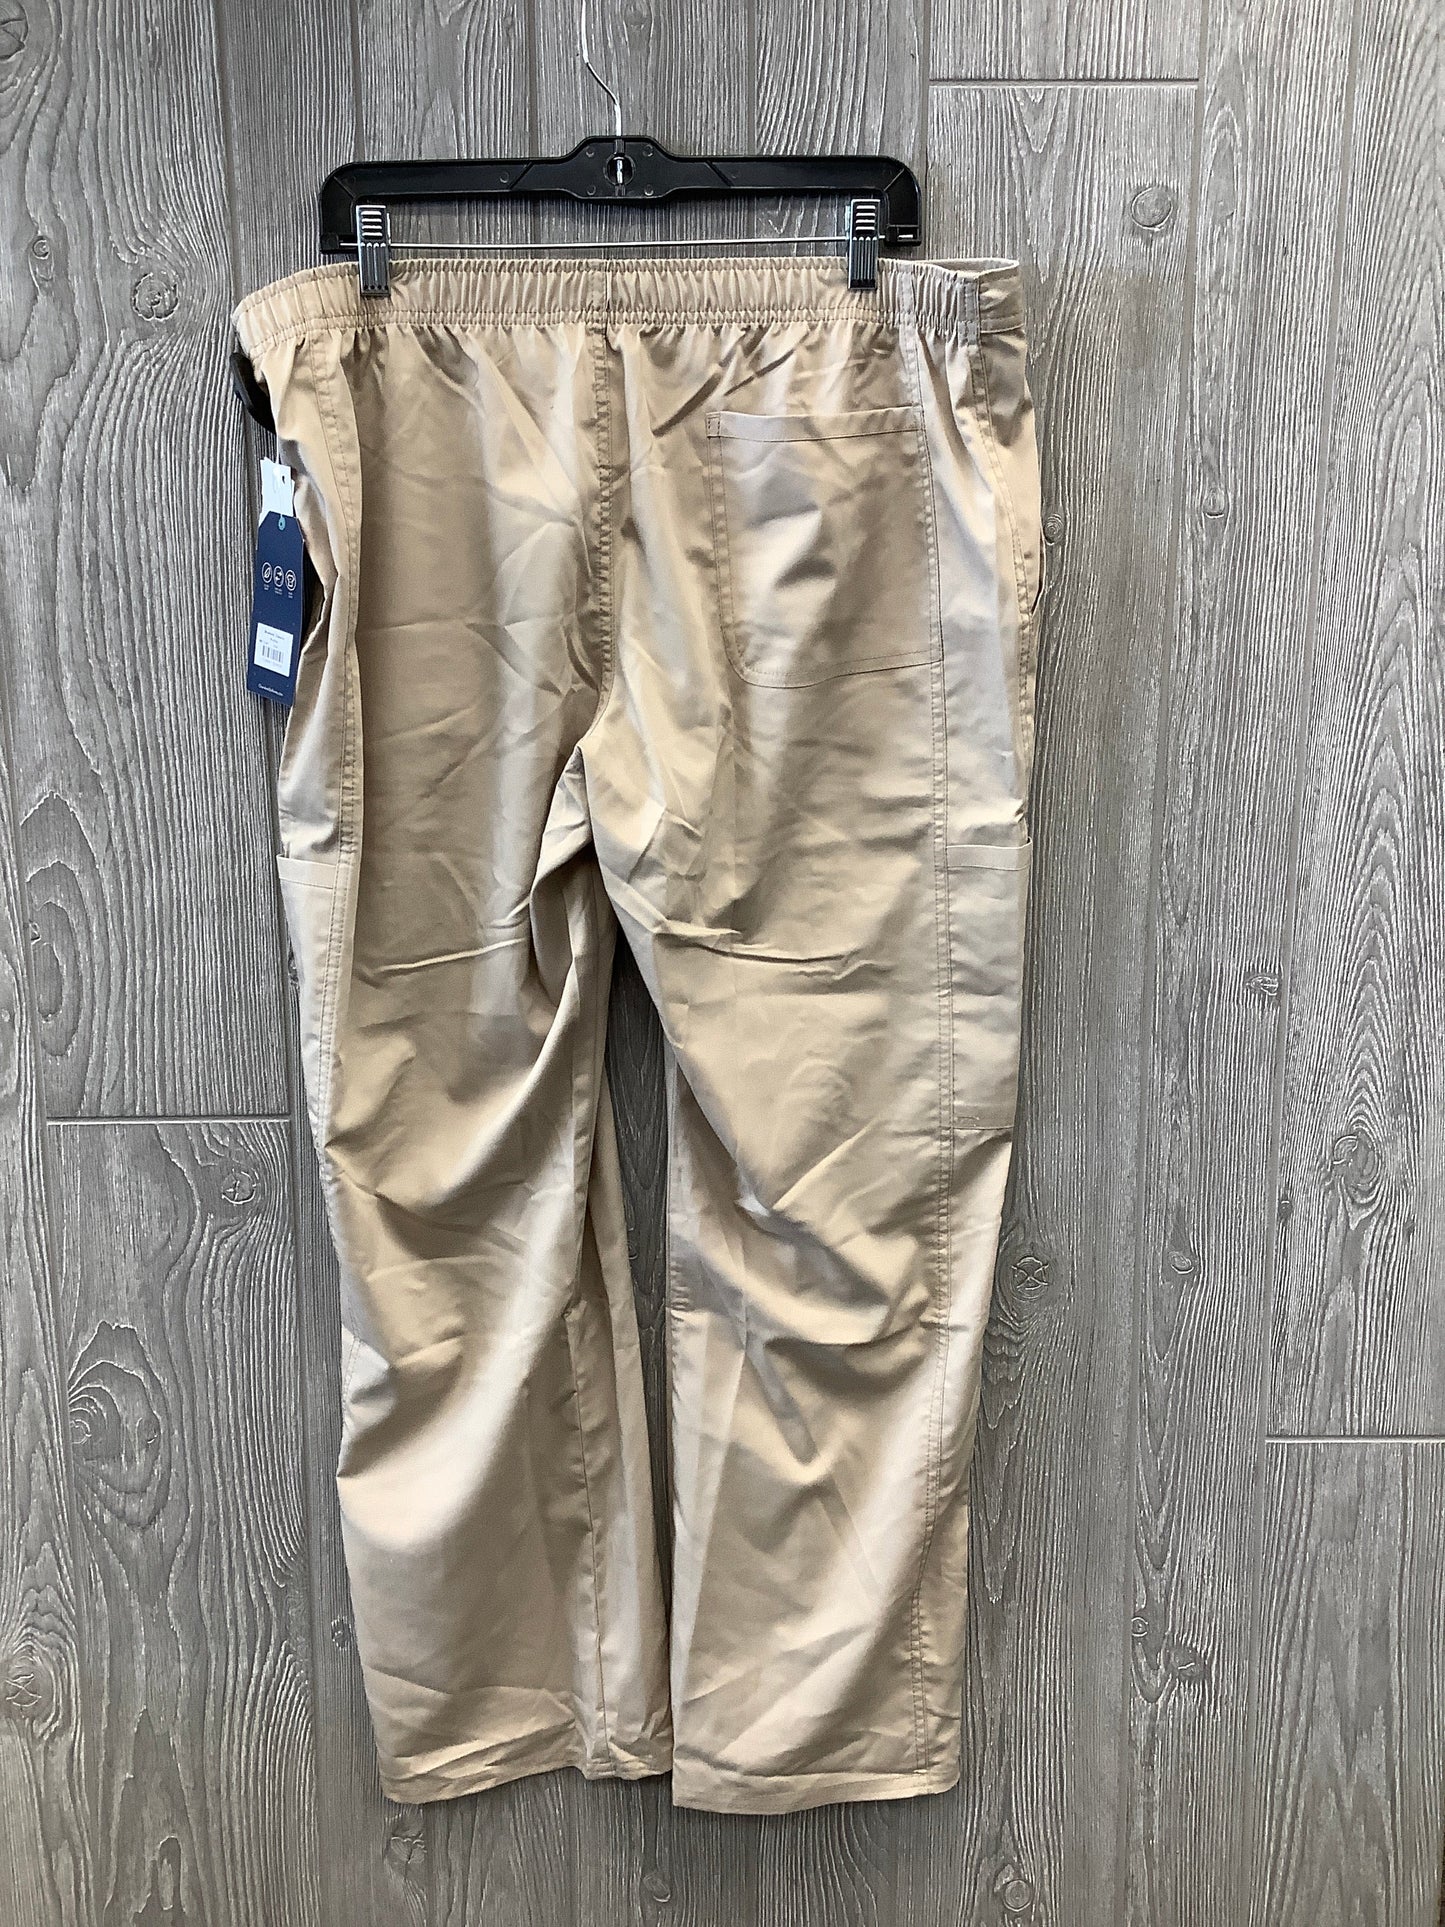 Pants Cargo & Utility By Clothes Mentor  Size: 10petite